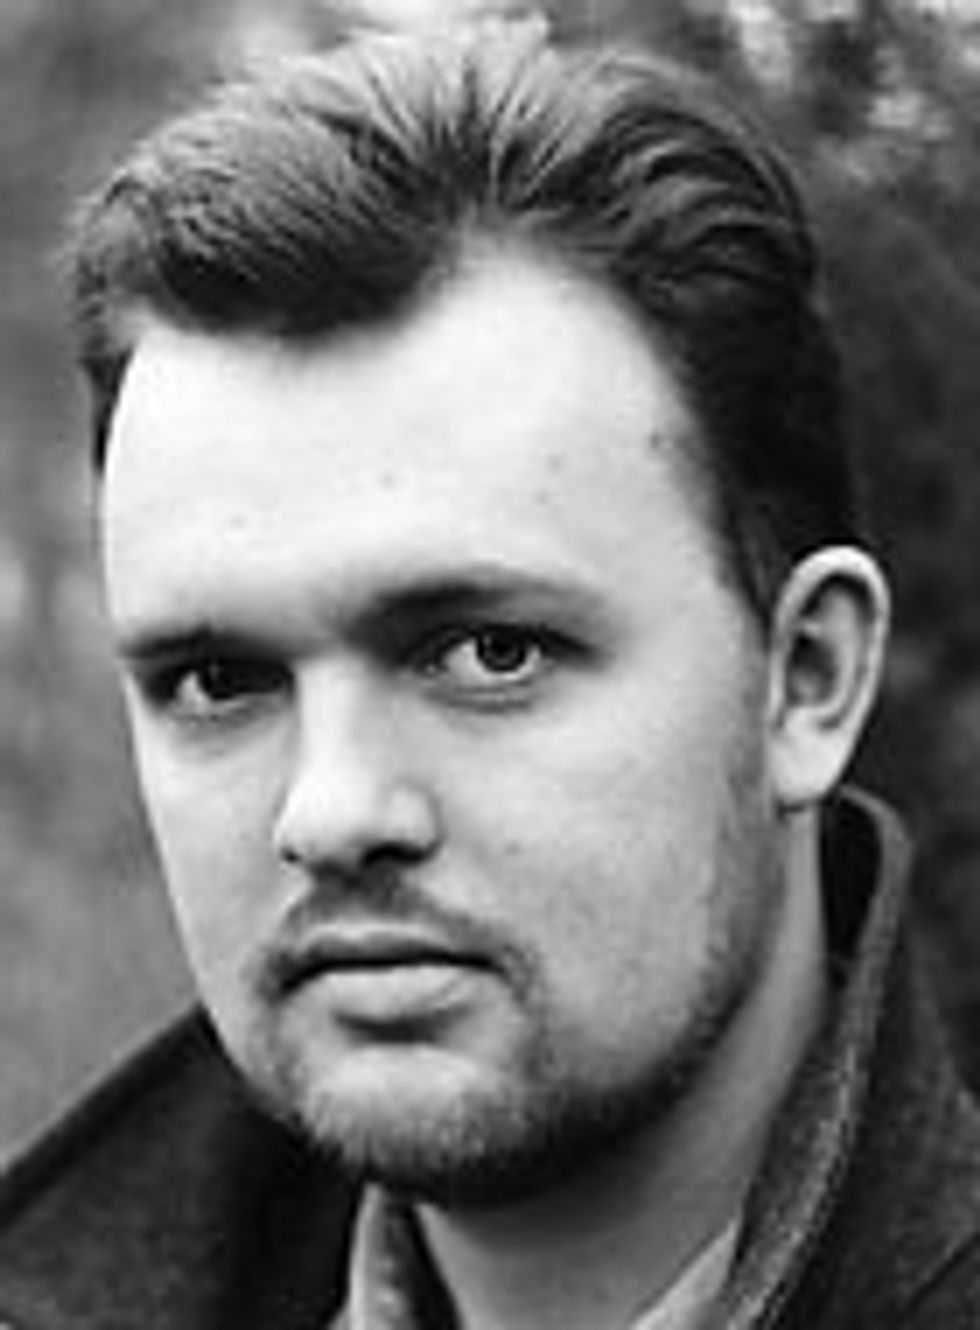 The Manly College Years Of Ross Douthat